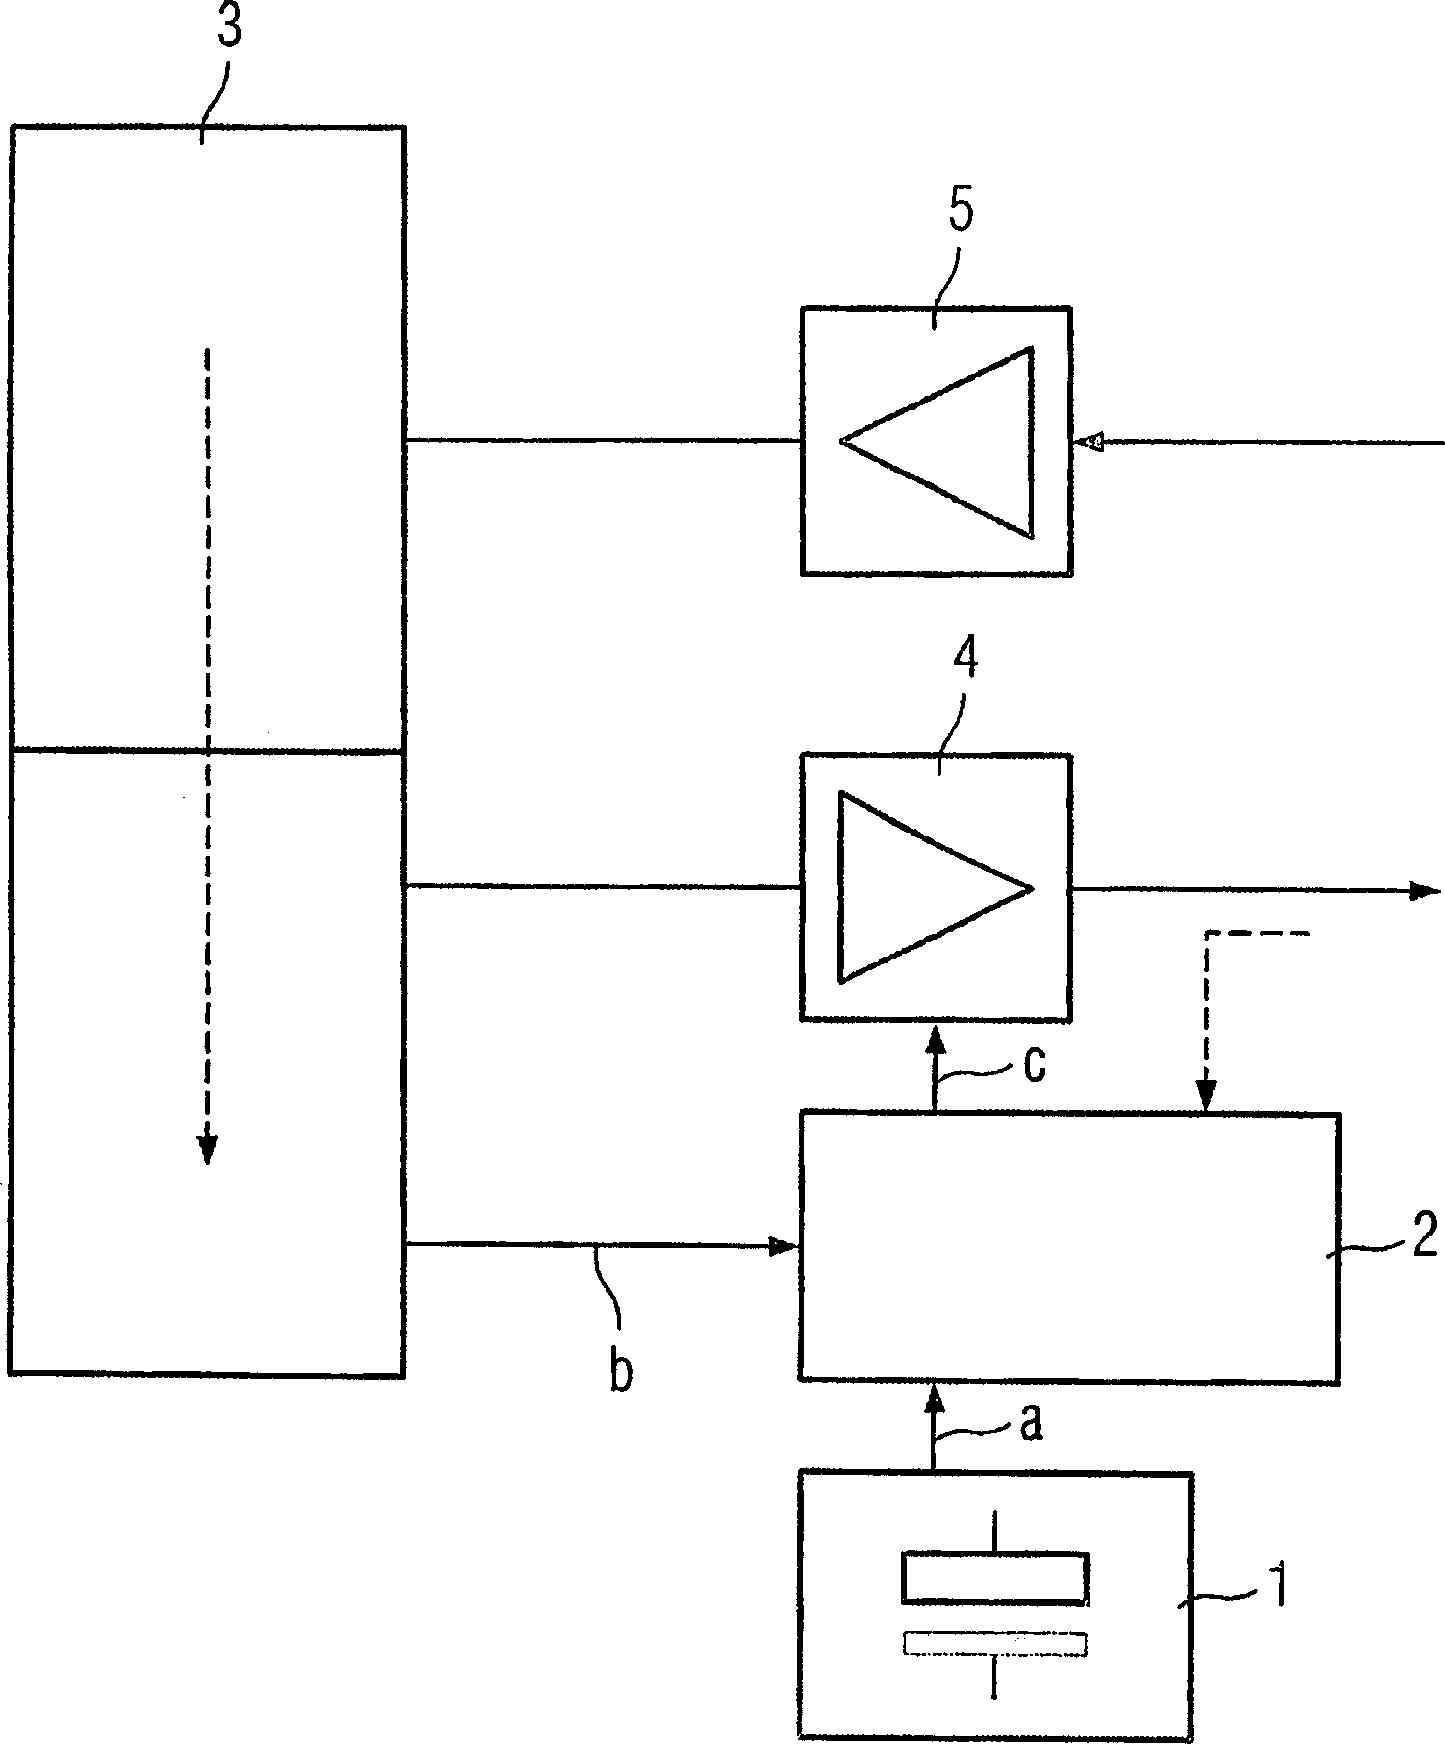 Method for controlling power for a mobile communications terminal